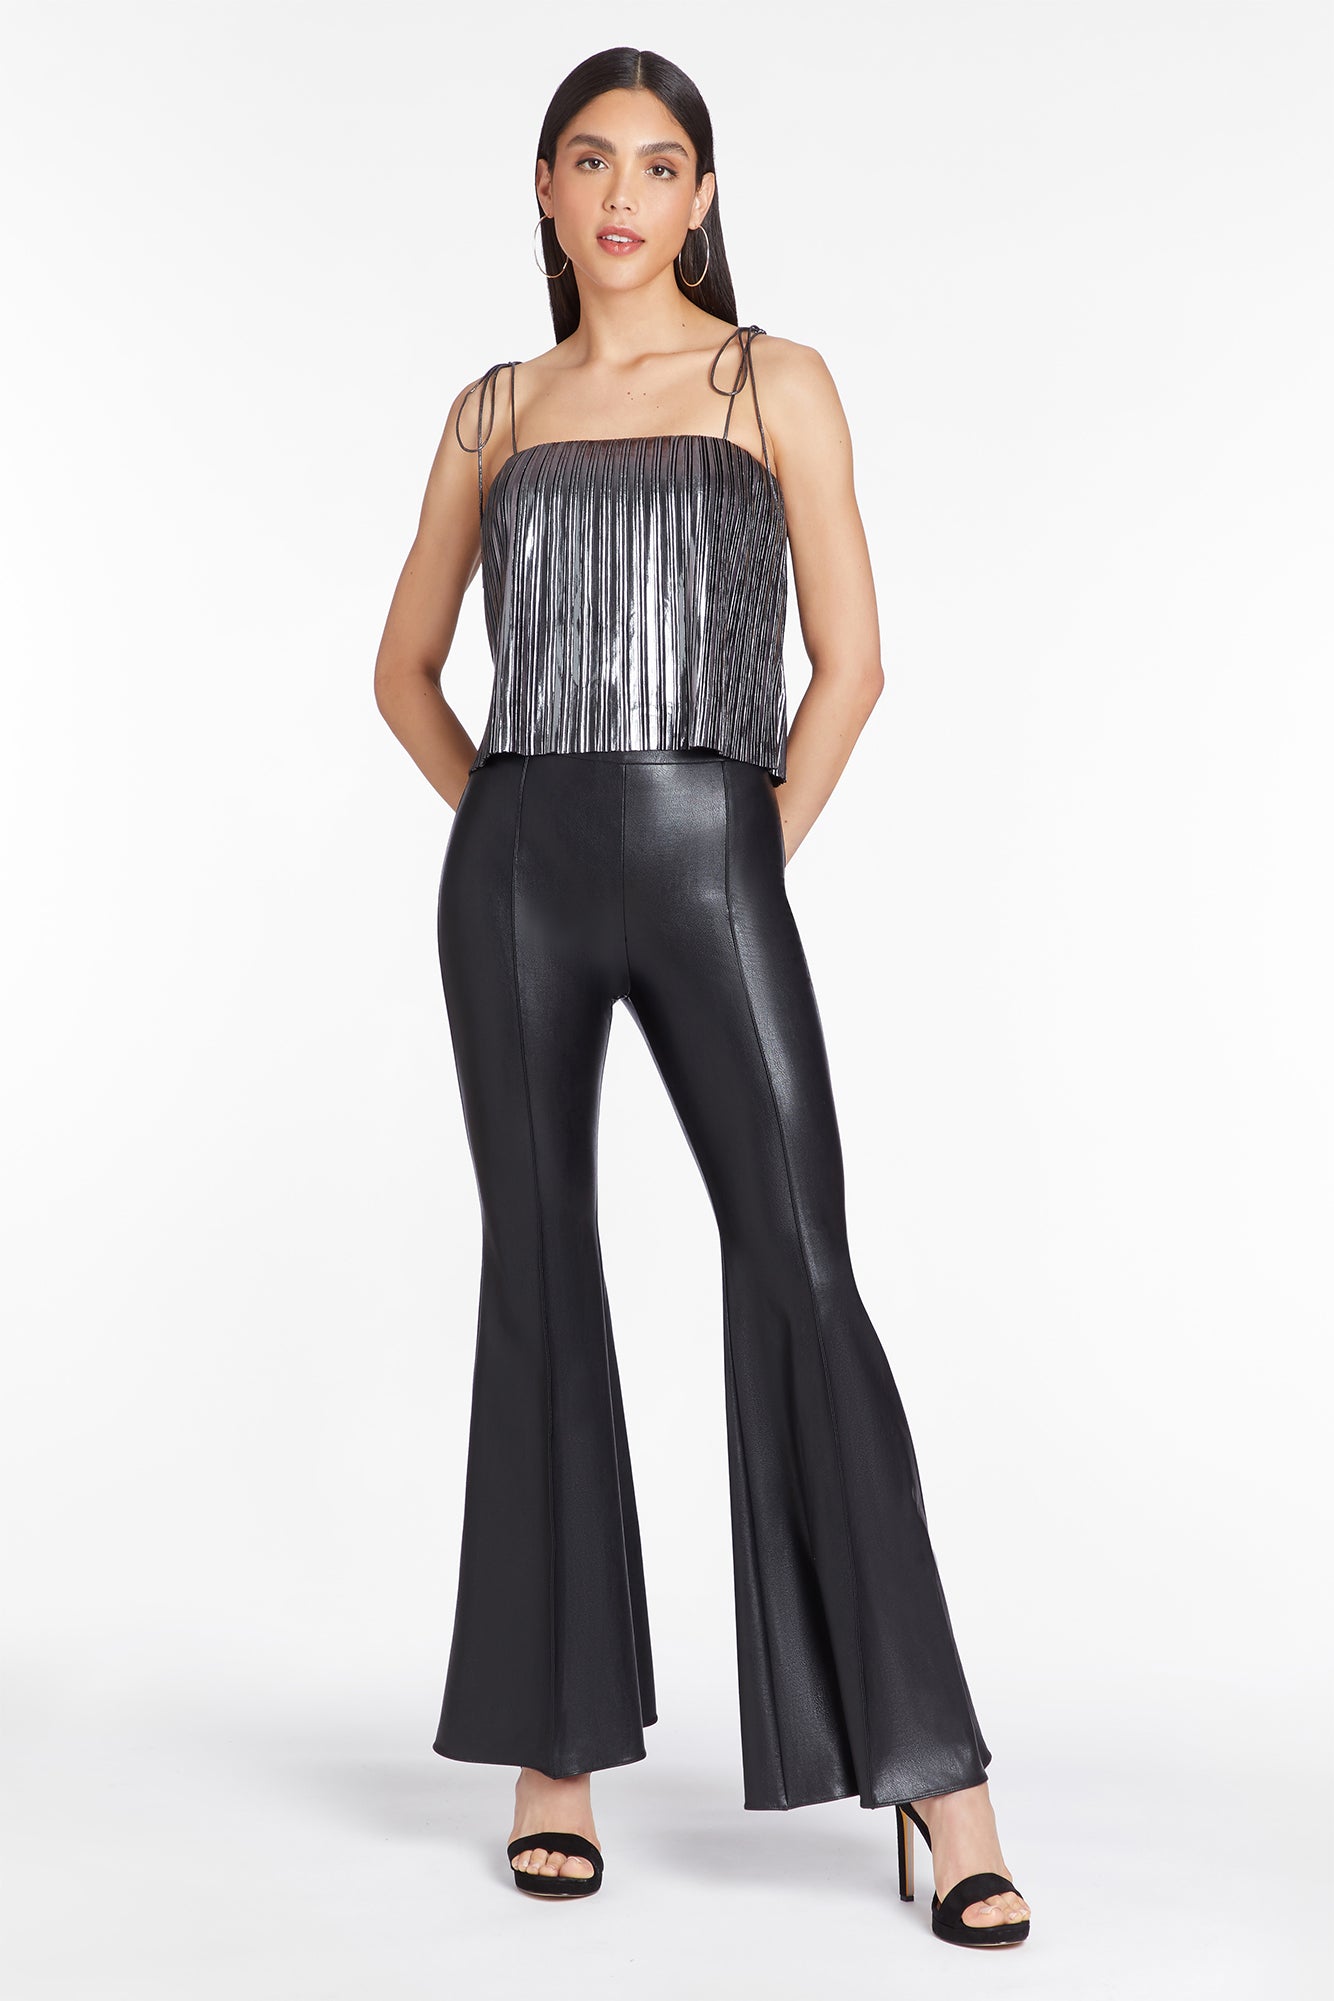 Hughes Pants in Faux Leather